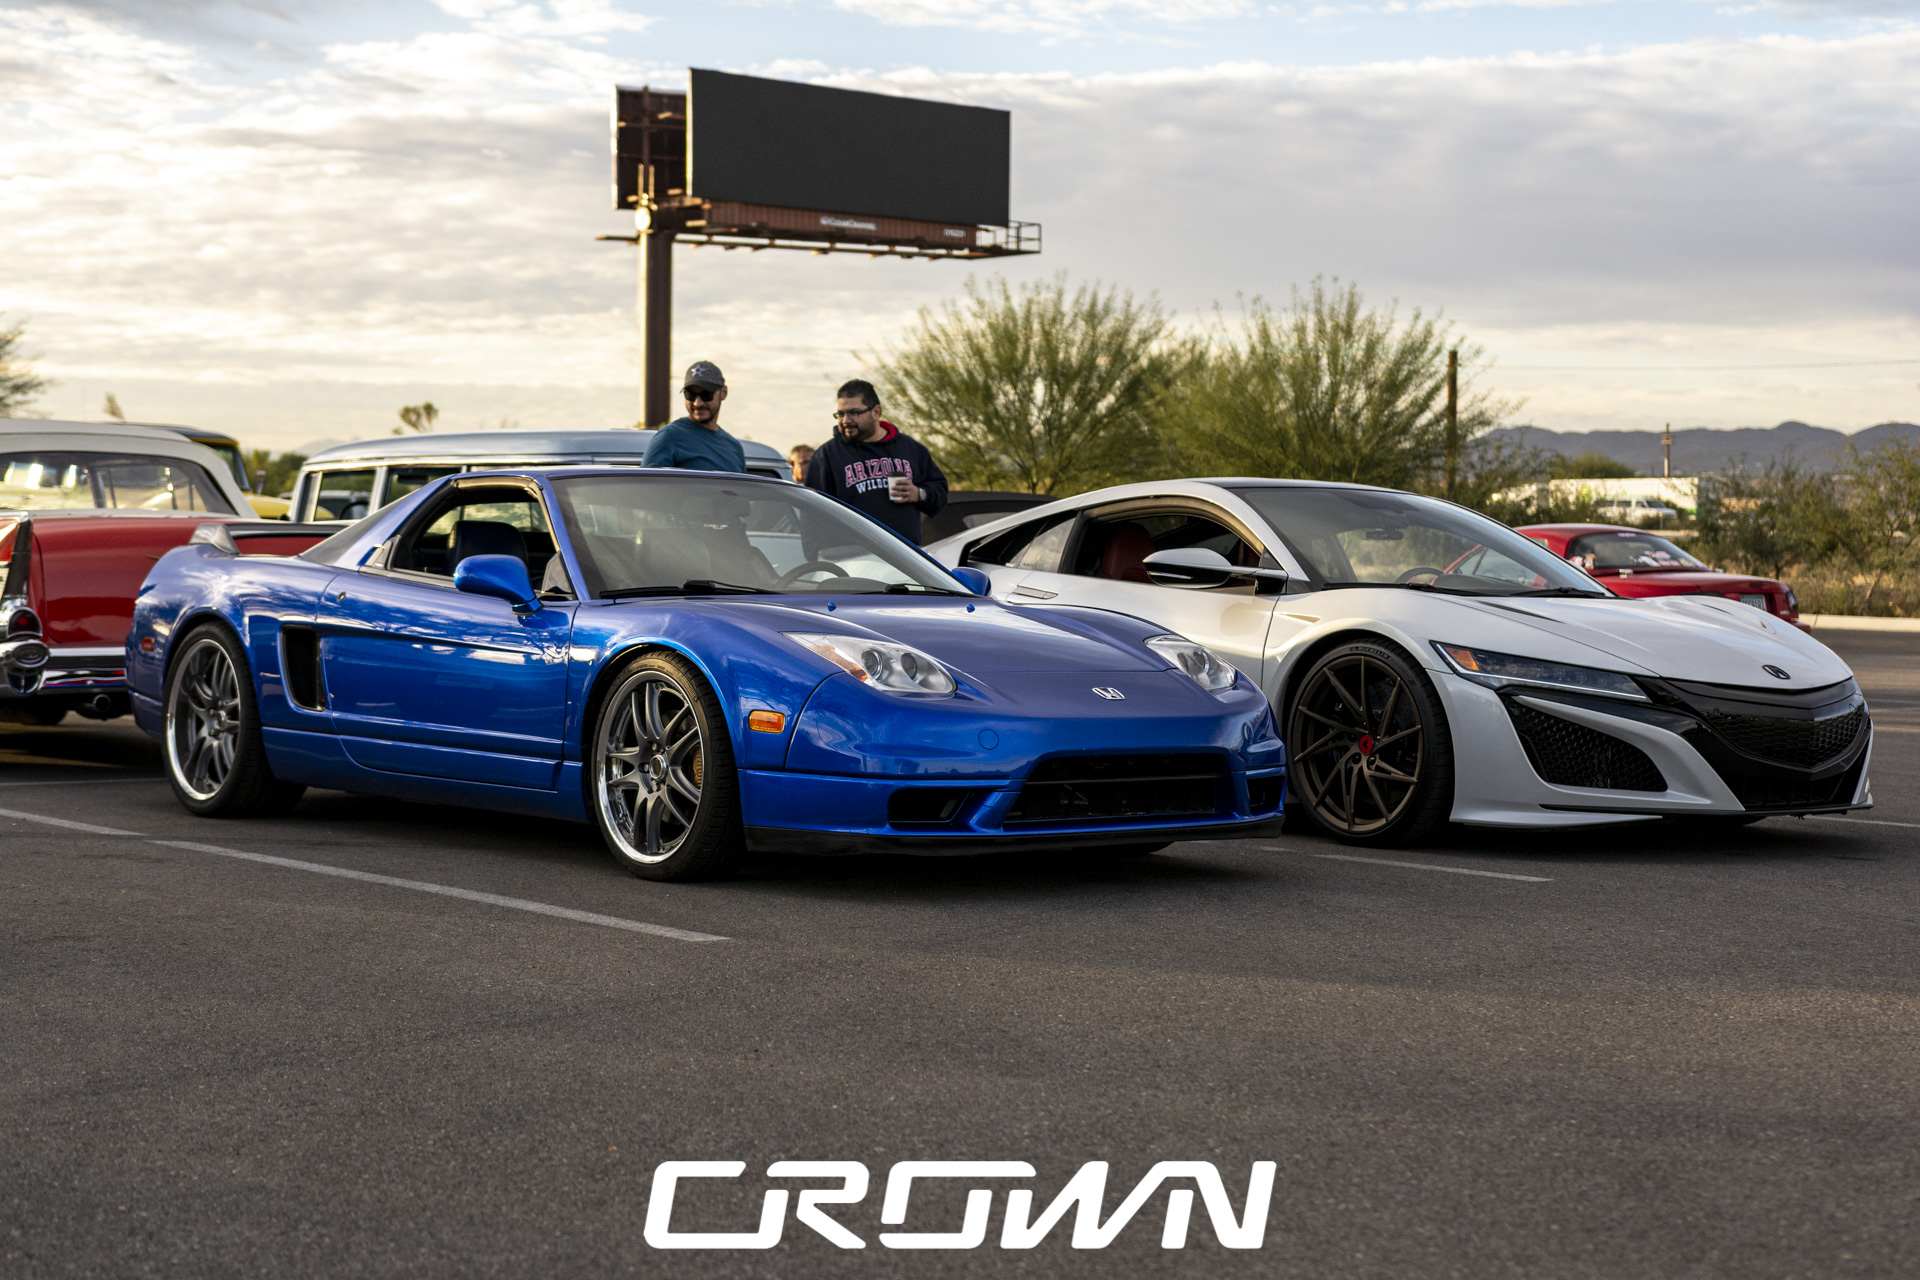 classic blue Honda NSX and silver Acura NSX